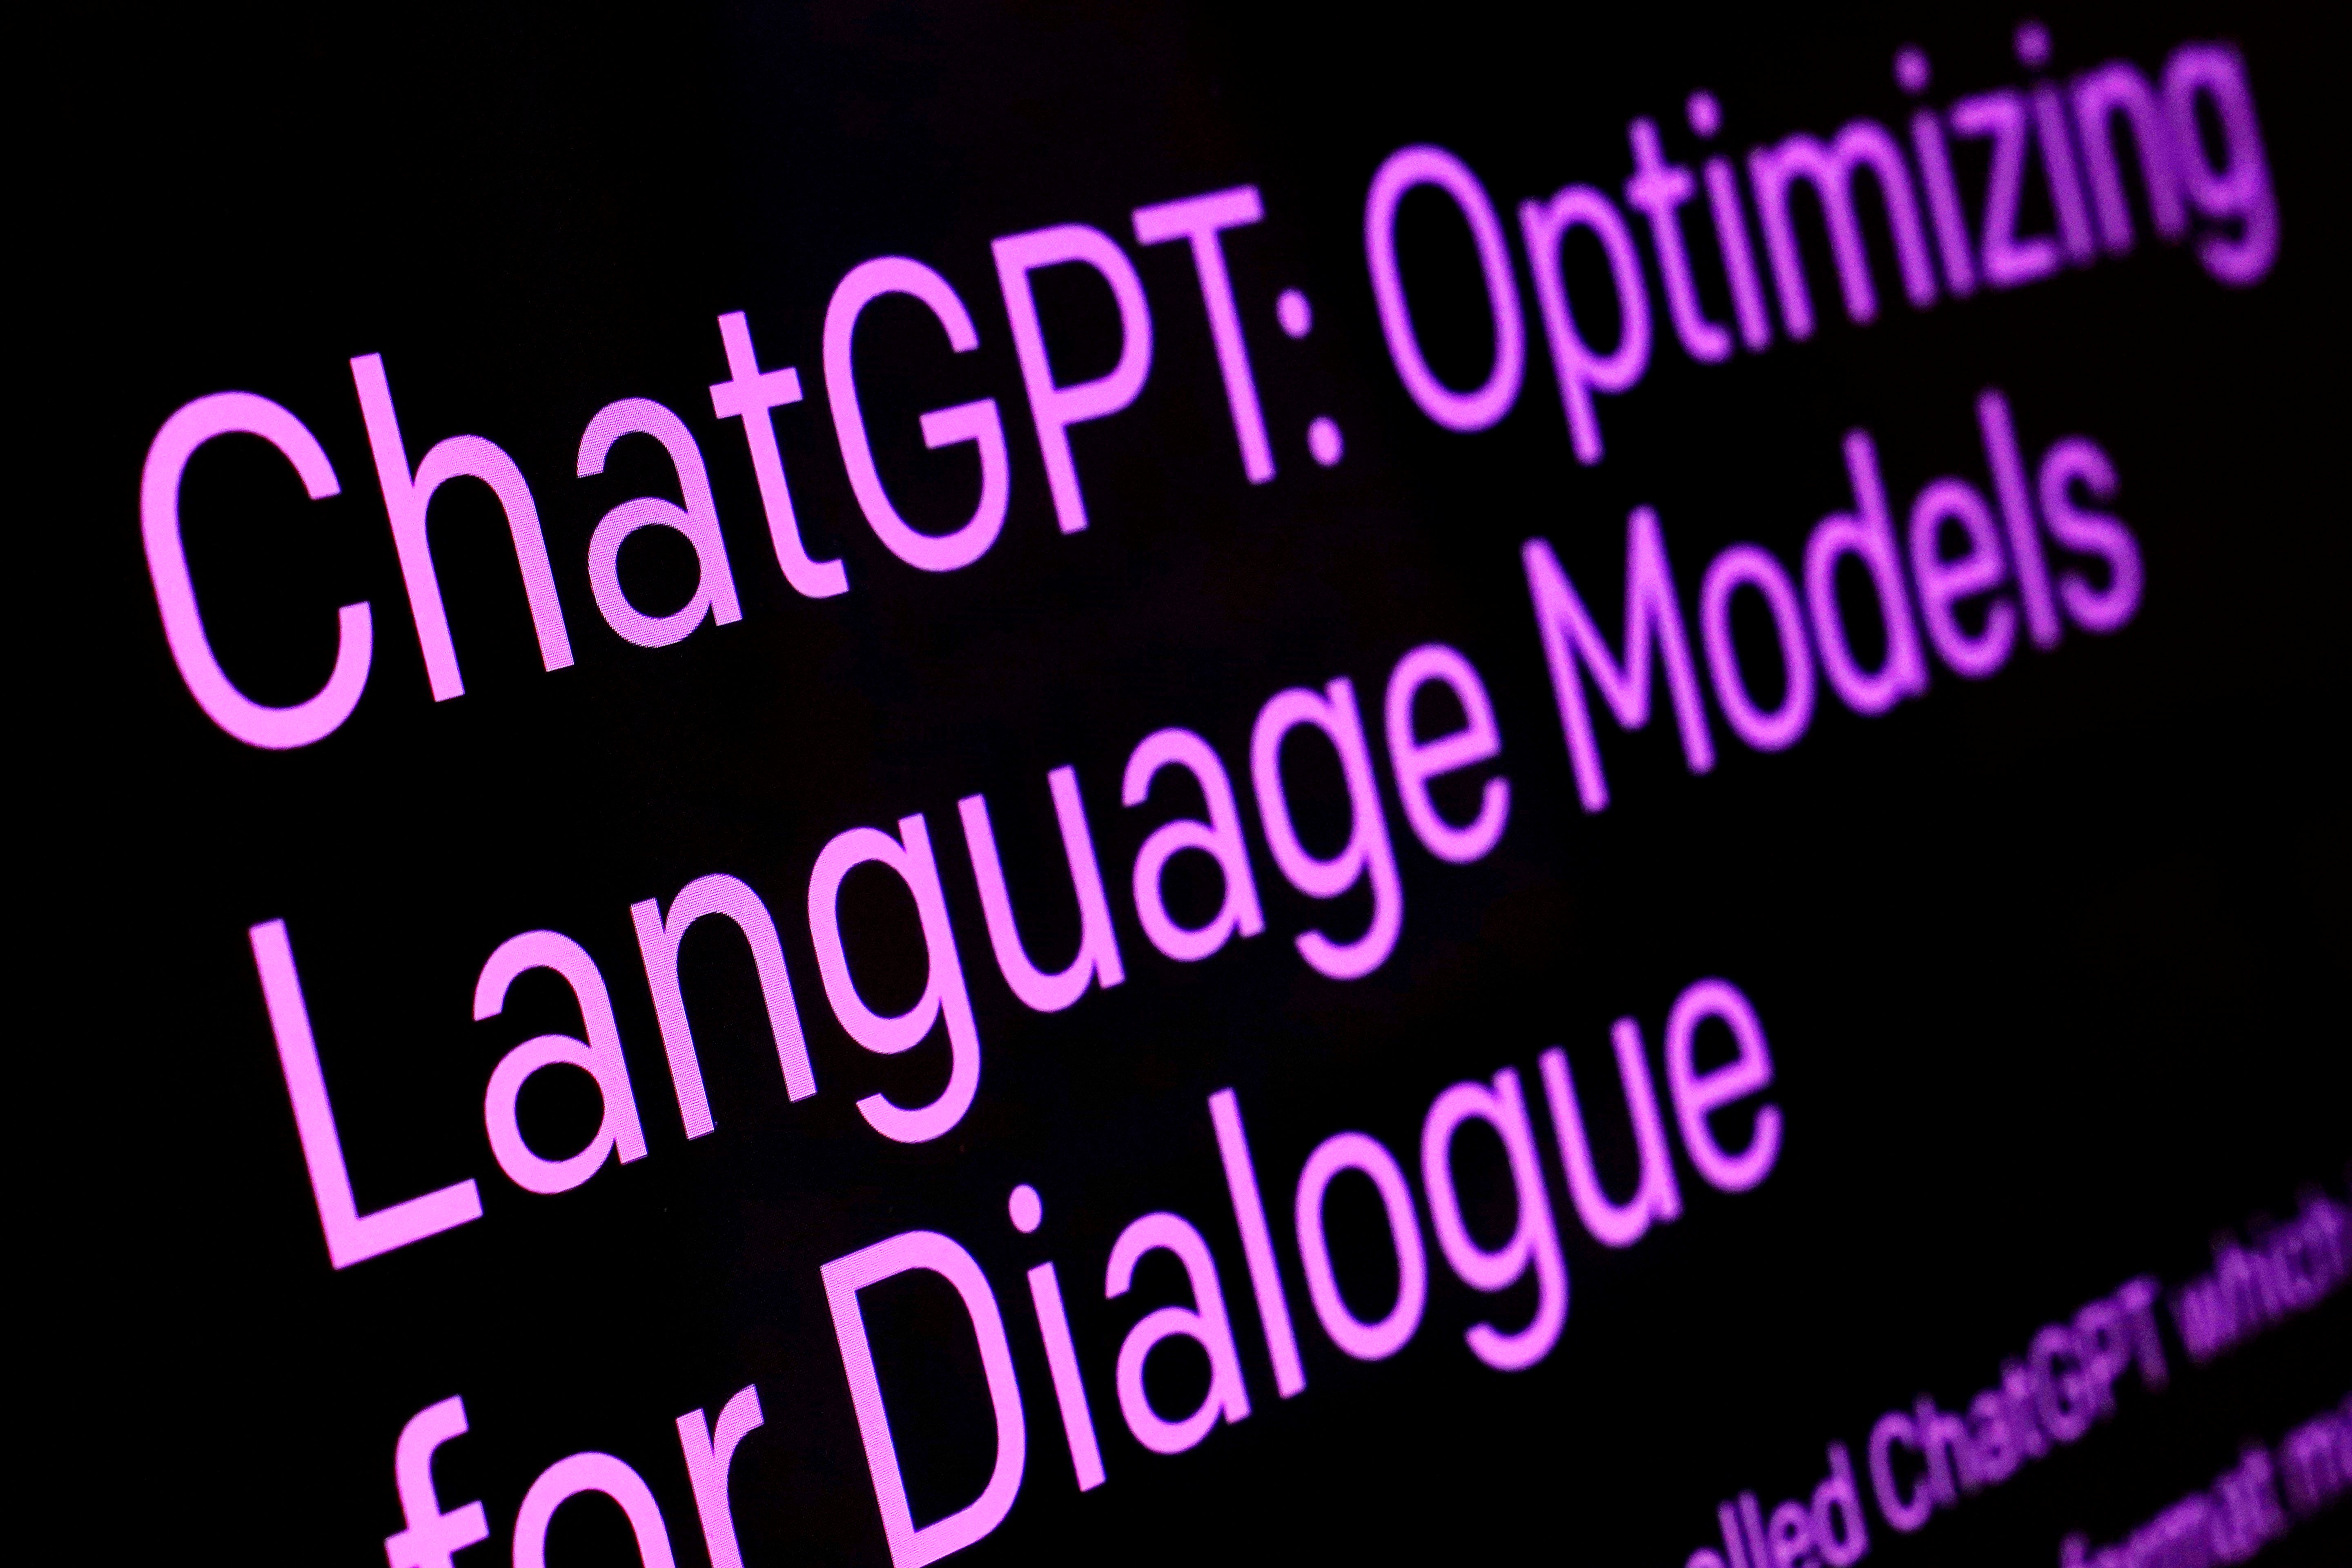 Researchers identified a number of key features of the ChatGPT writing style